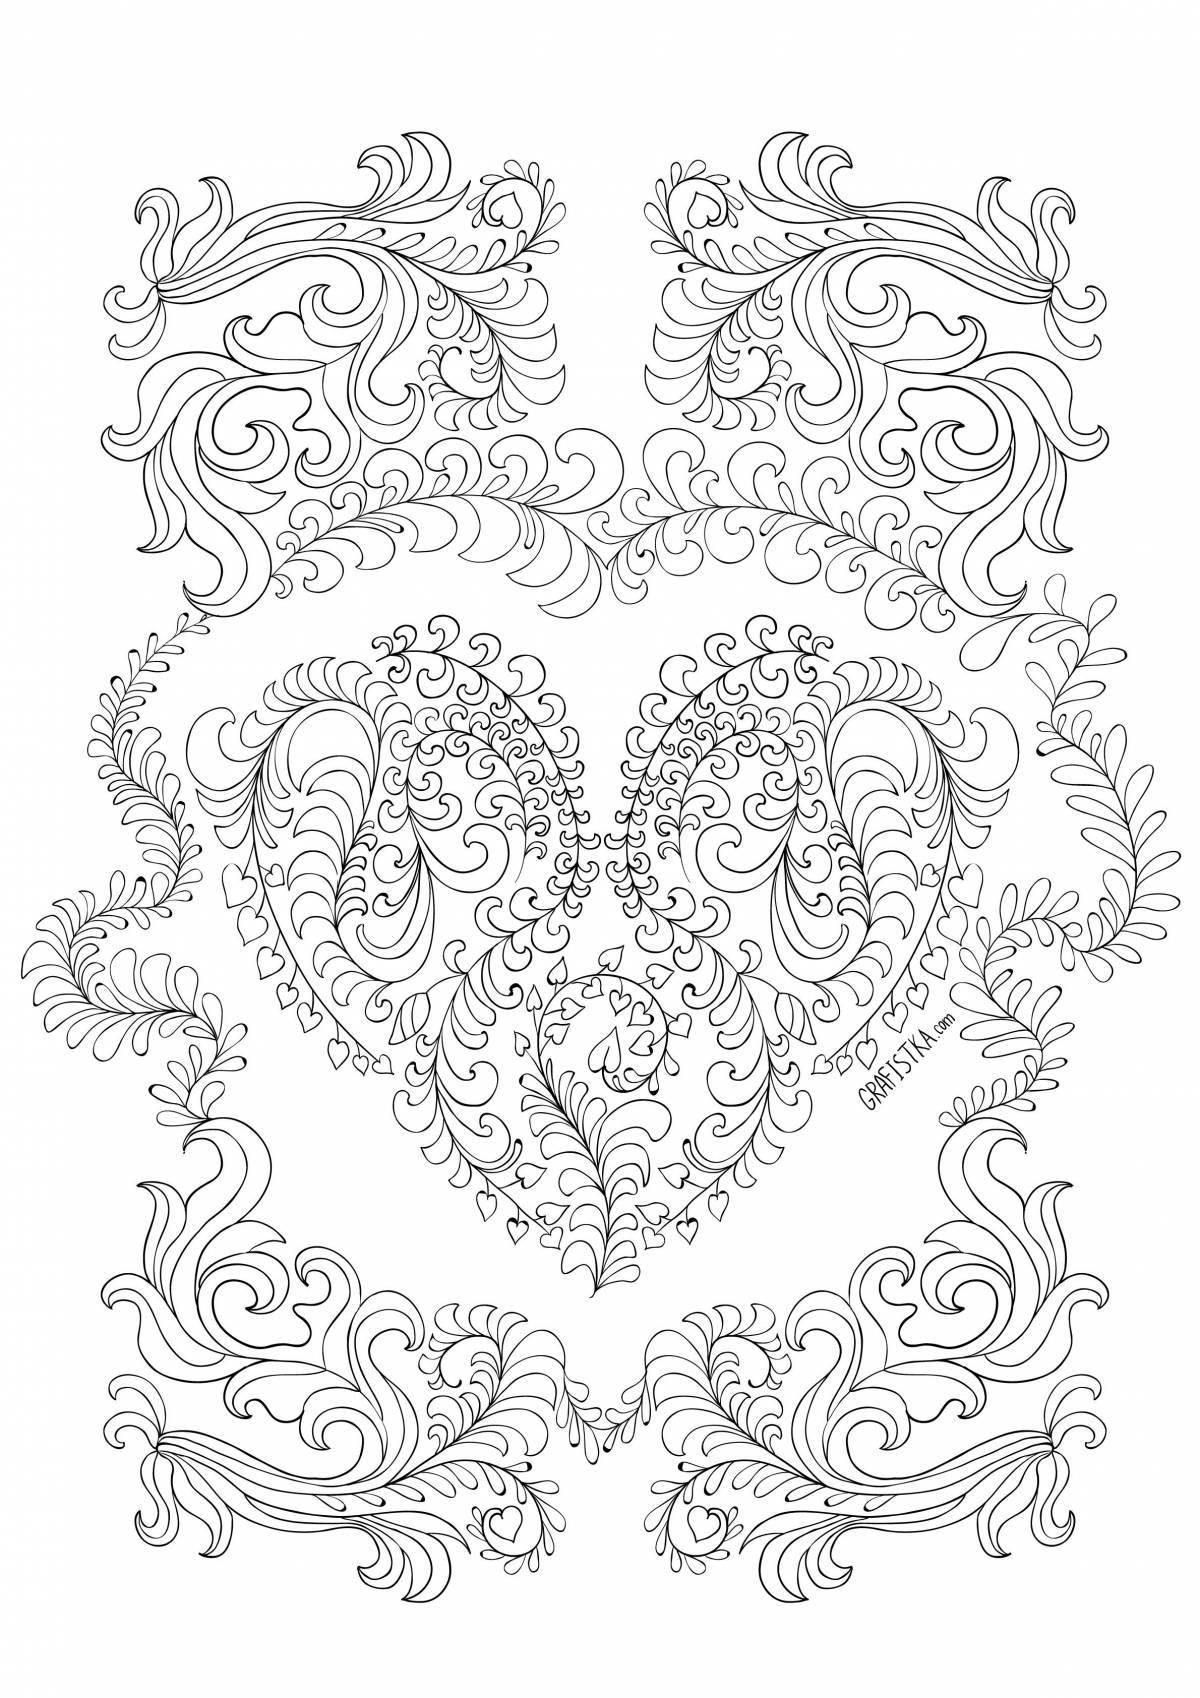 Coloring book with a unique pattern